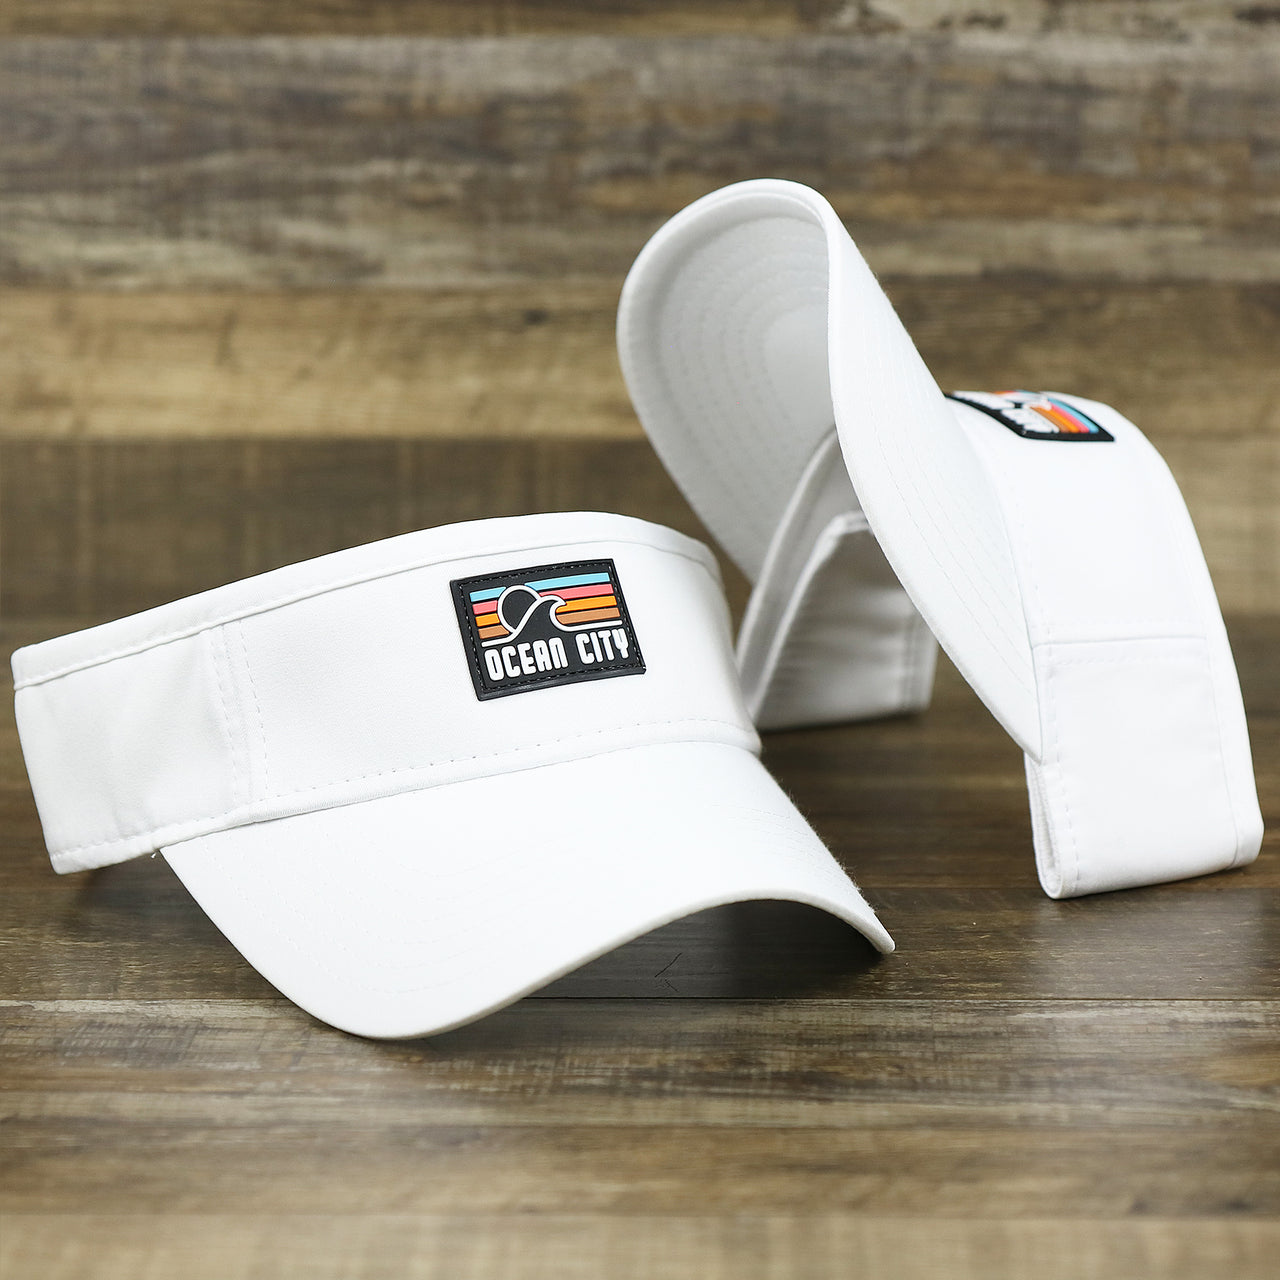 The New Jersey High Point PVC Ocean City Rubber Patch Cool Fit Adjustable Visor | White Visor